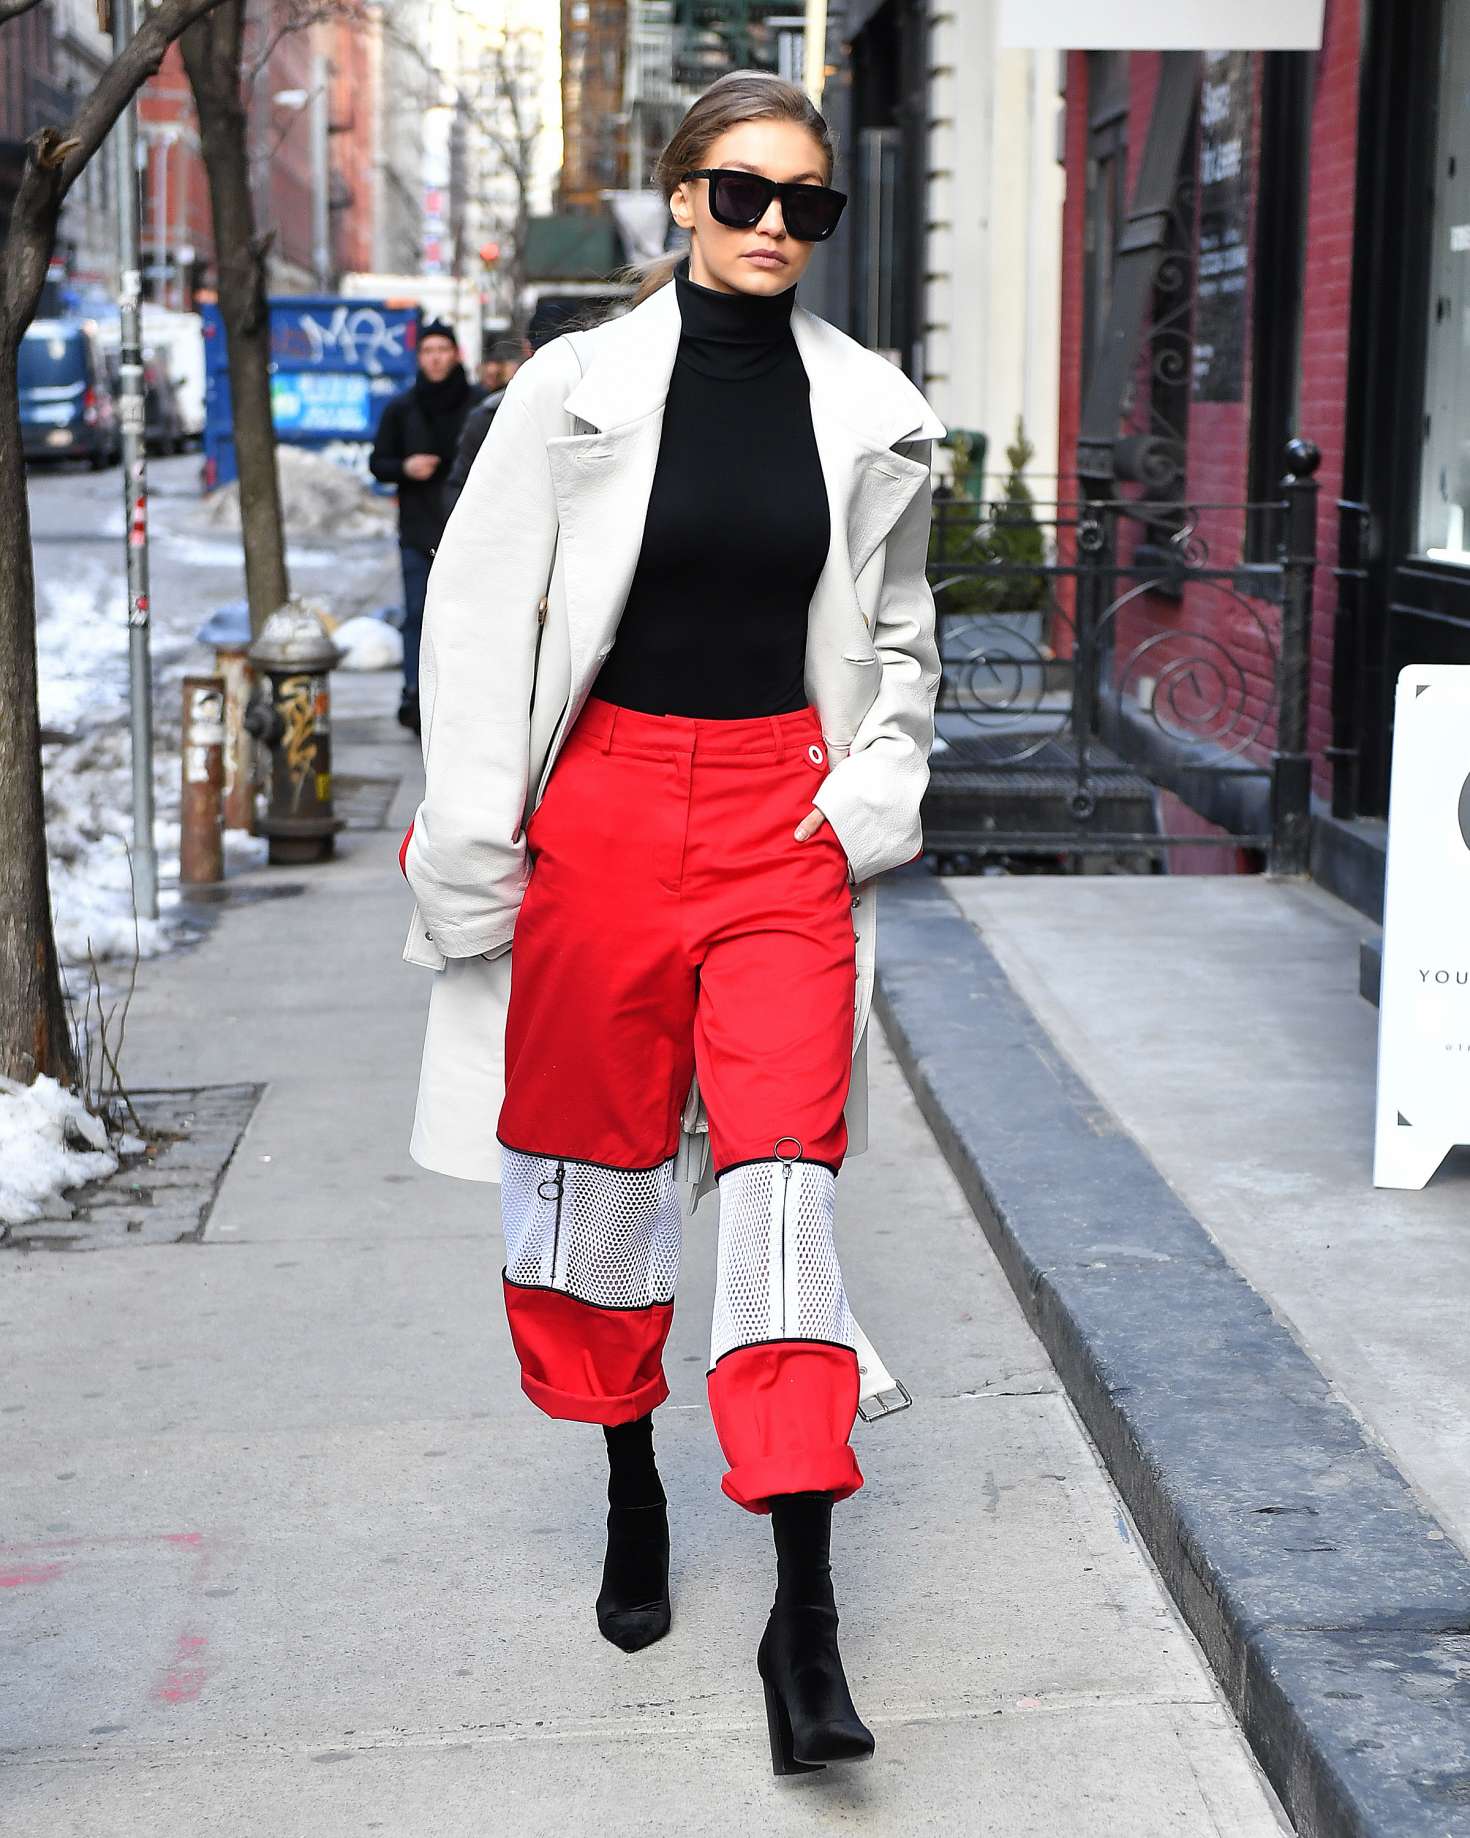 Gigi Hadid in eye-catching pair of red pants in NYC | GotCeleb